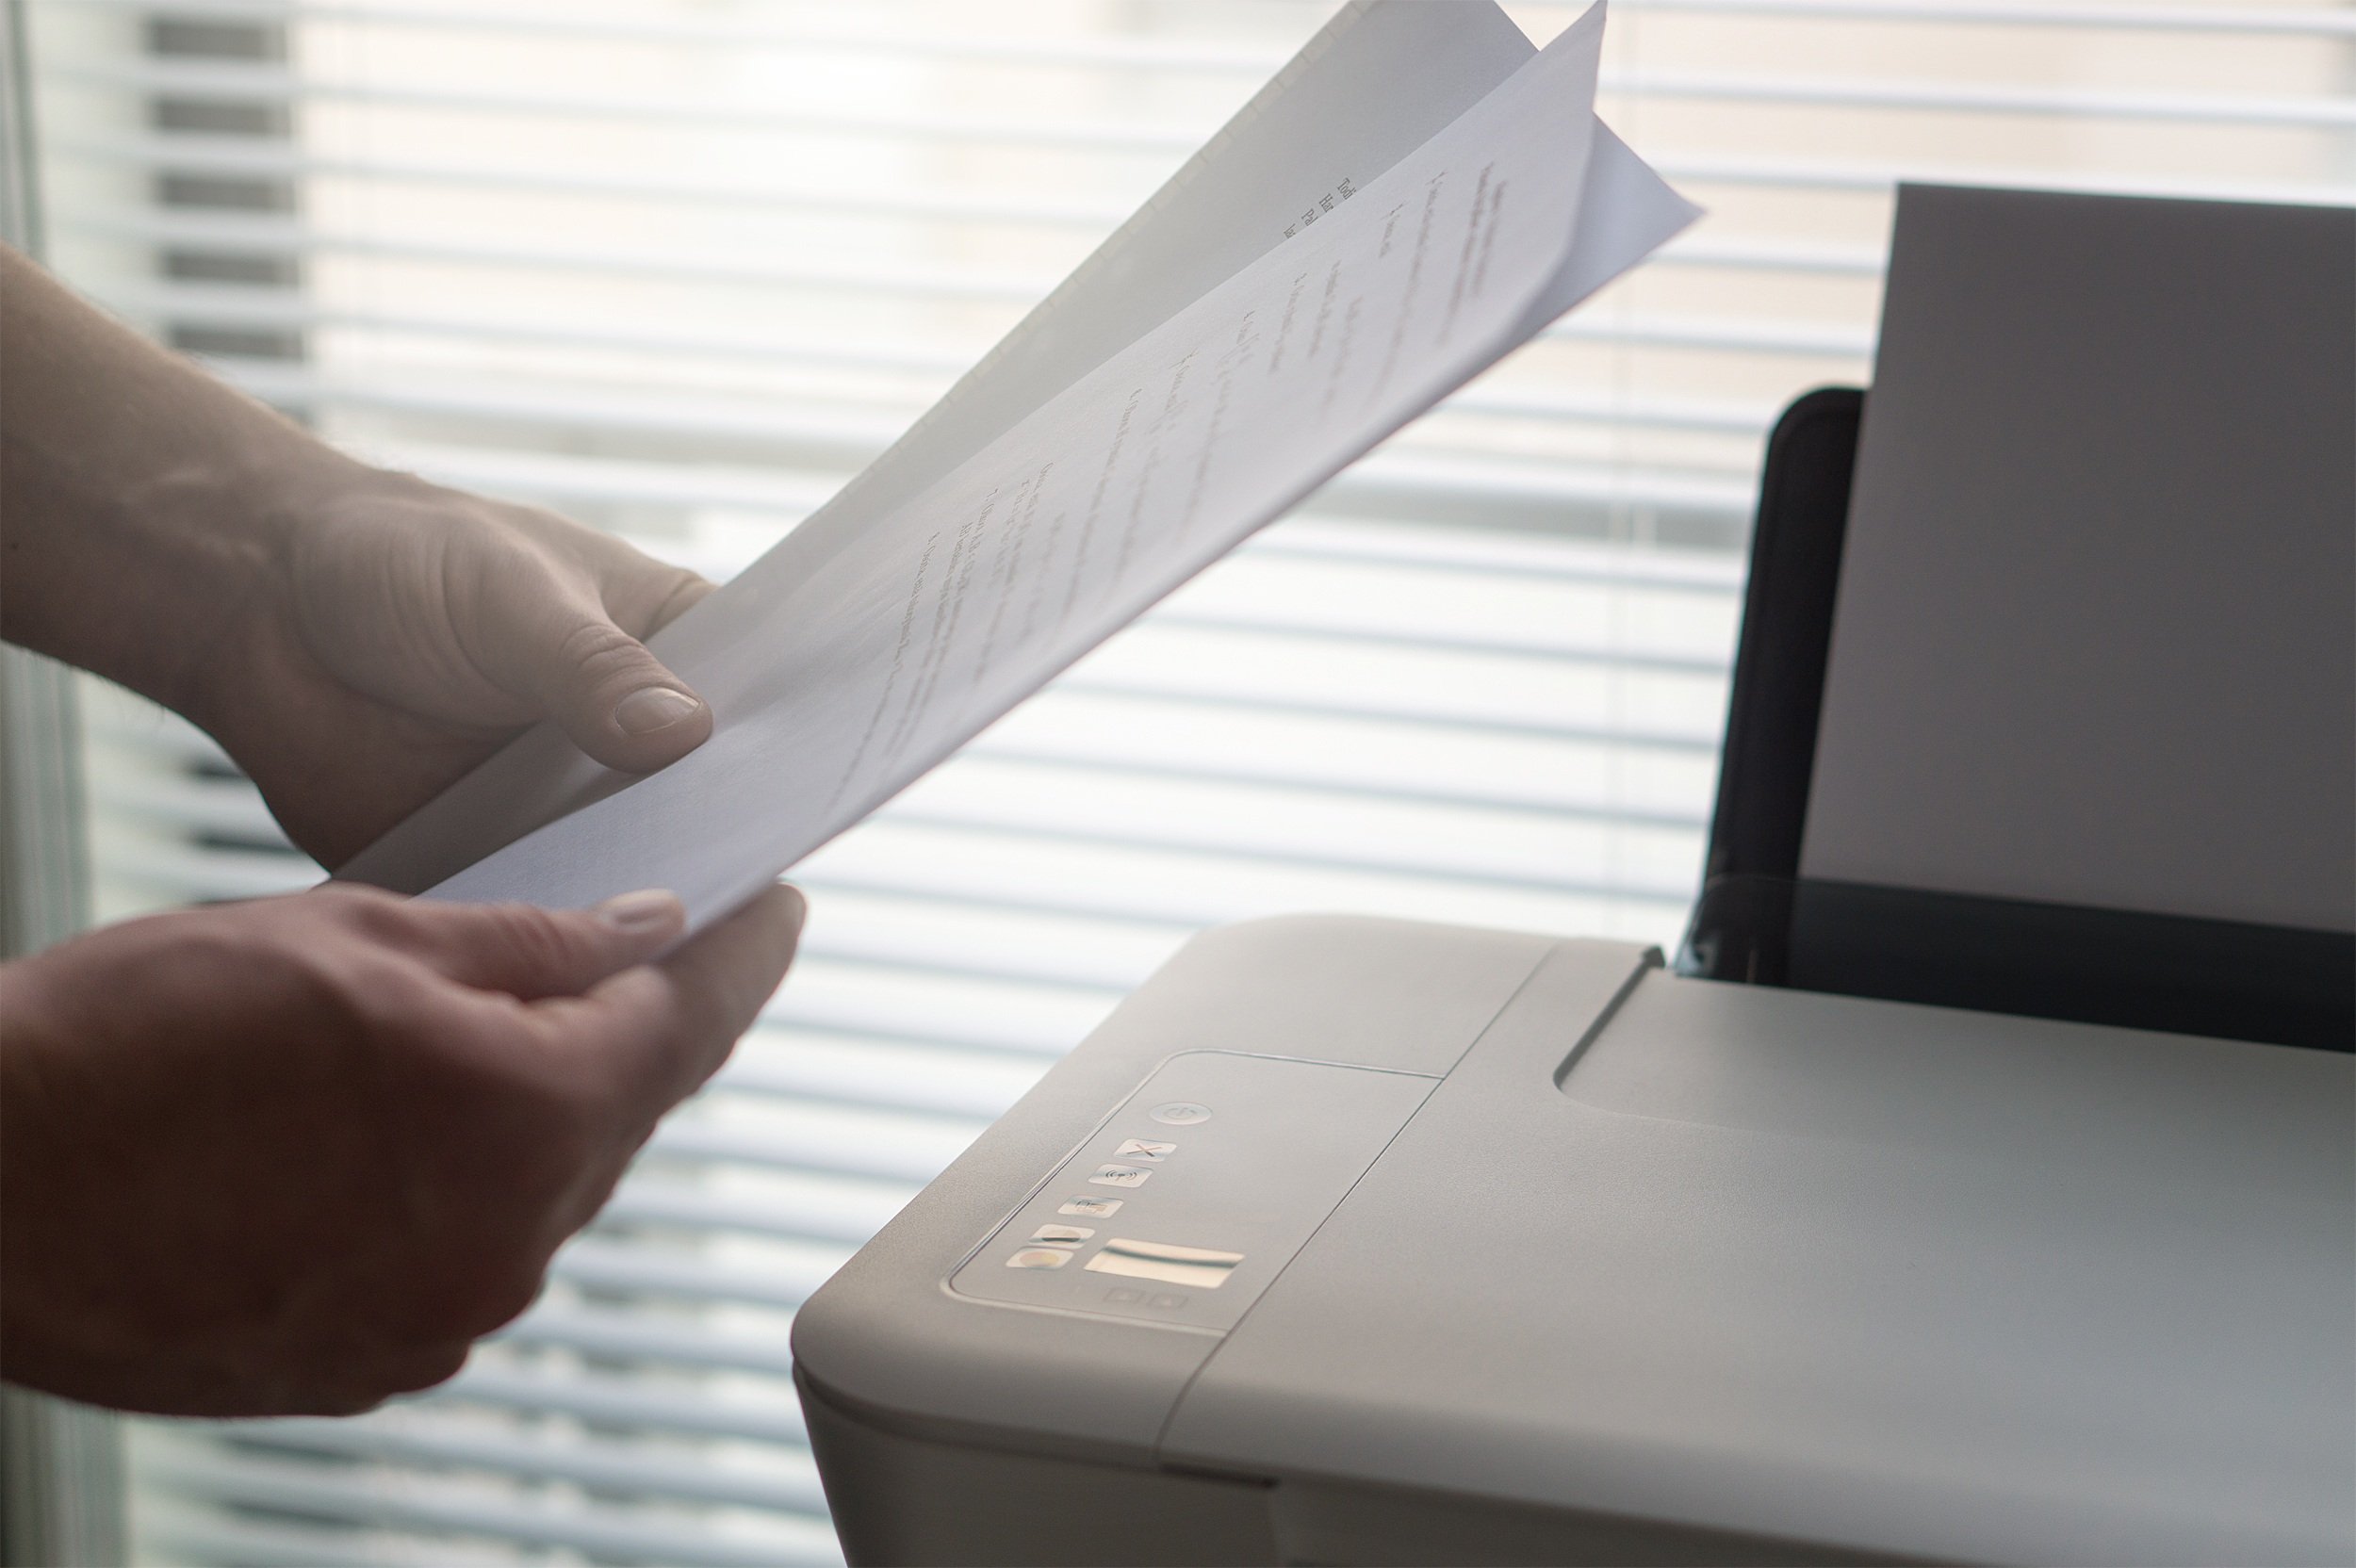 How to scan a document into an email